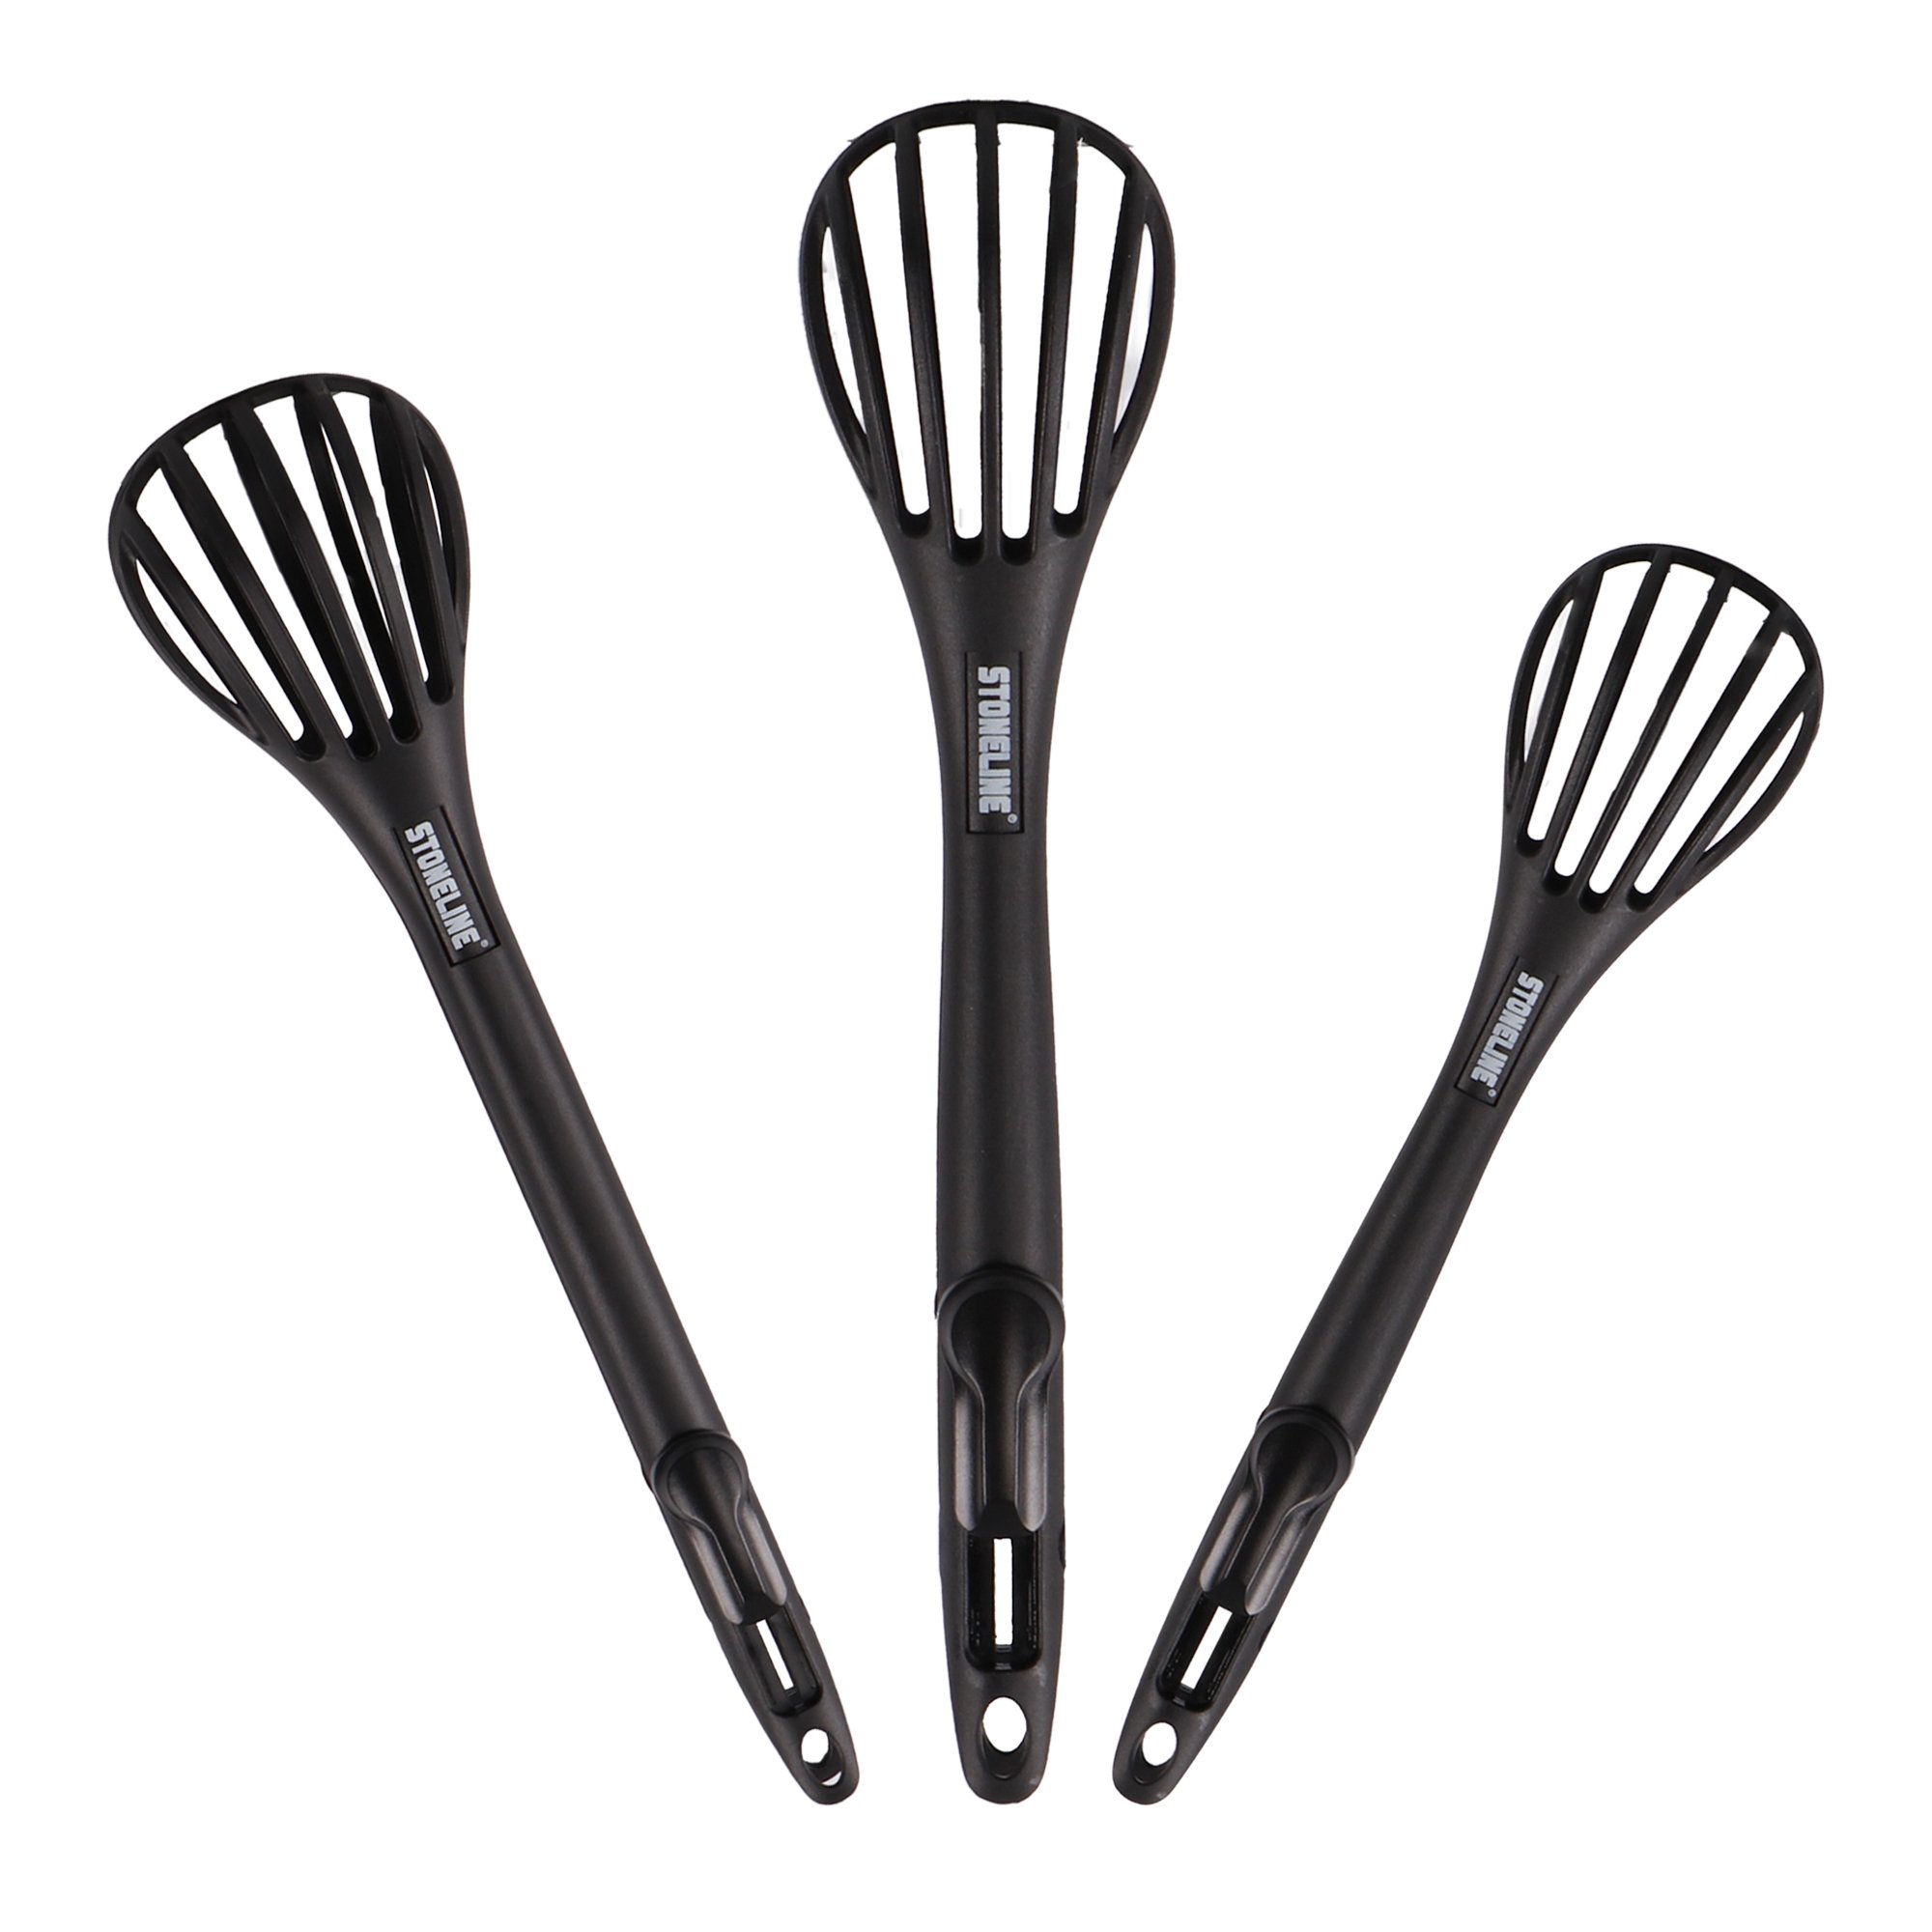 STONELINE® 3 pc Food Clip & Whisk Set, 2 in 1 Multifunctional Whisk, Heat-Resistant